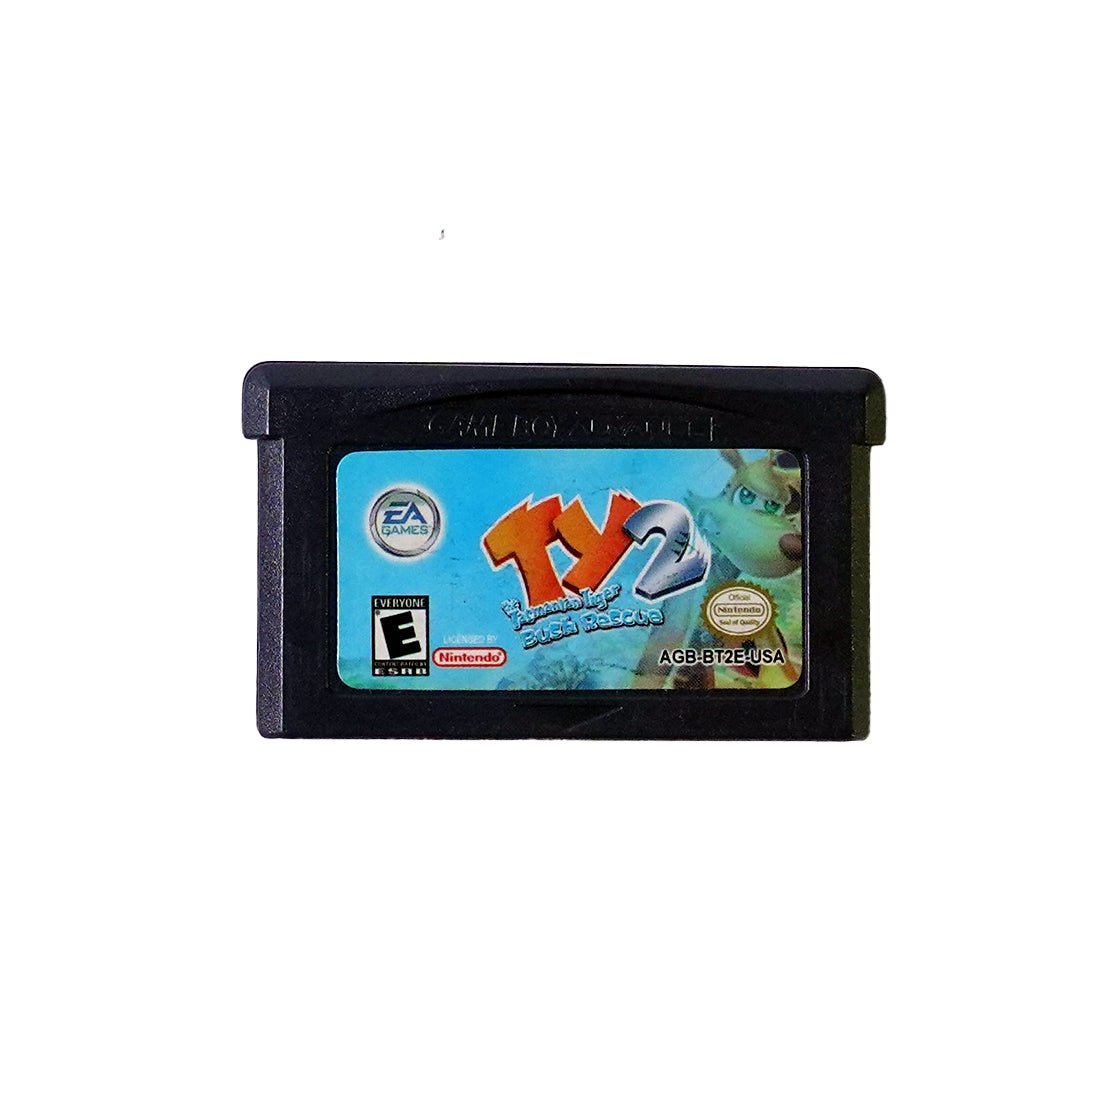 (Pre-Owned) Ty the Tasmanian Tiger 2: Bush Rescue Game - Gameboy Advance - ريترو - Store 974 | ستور ٩٧٤